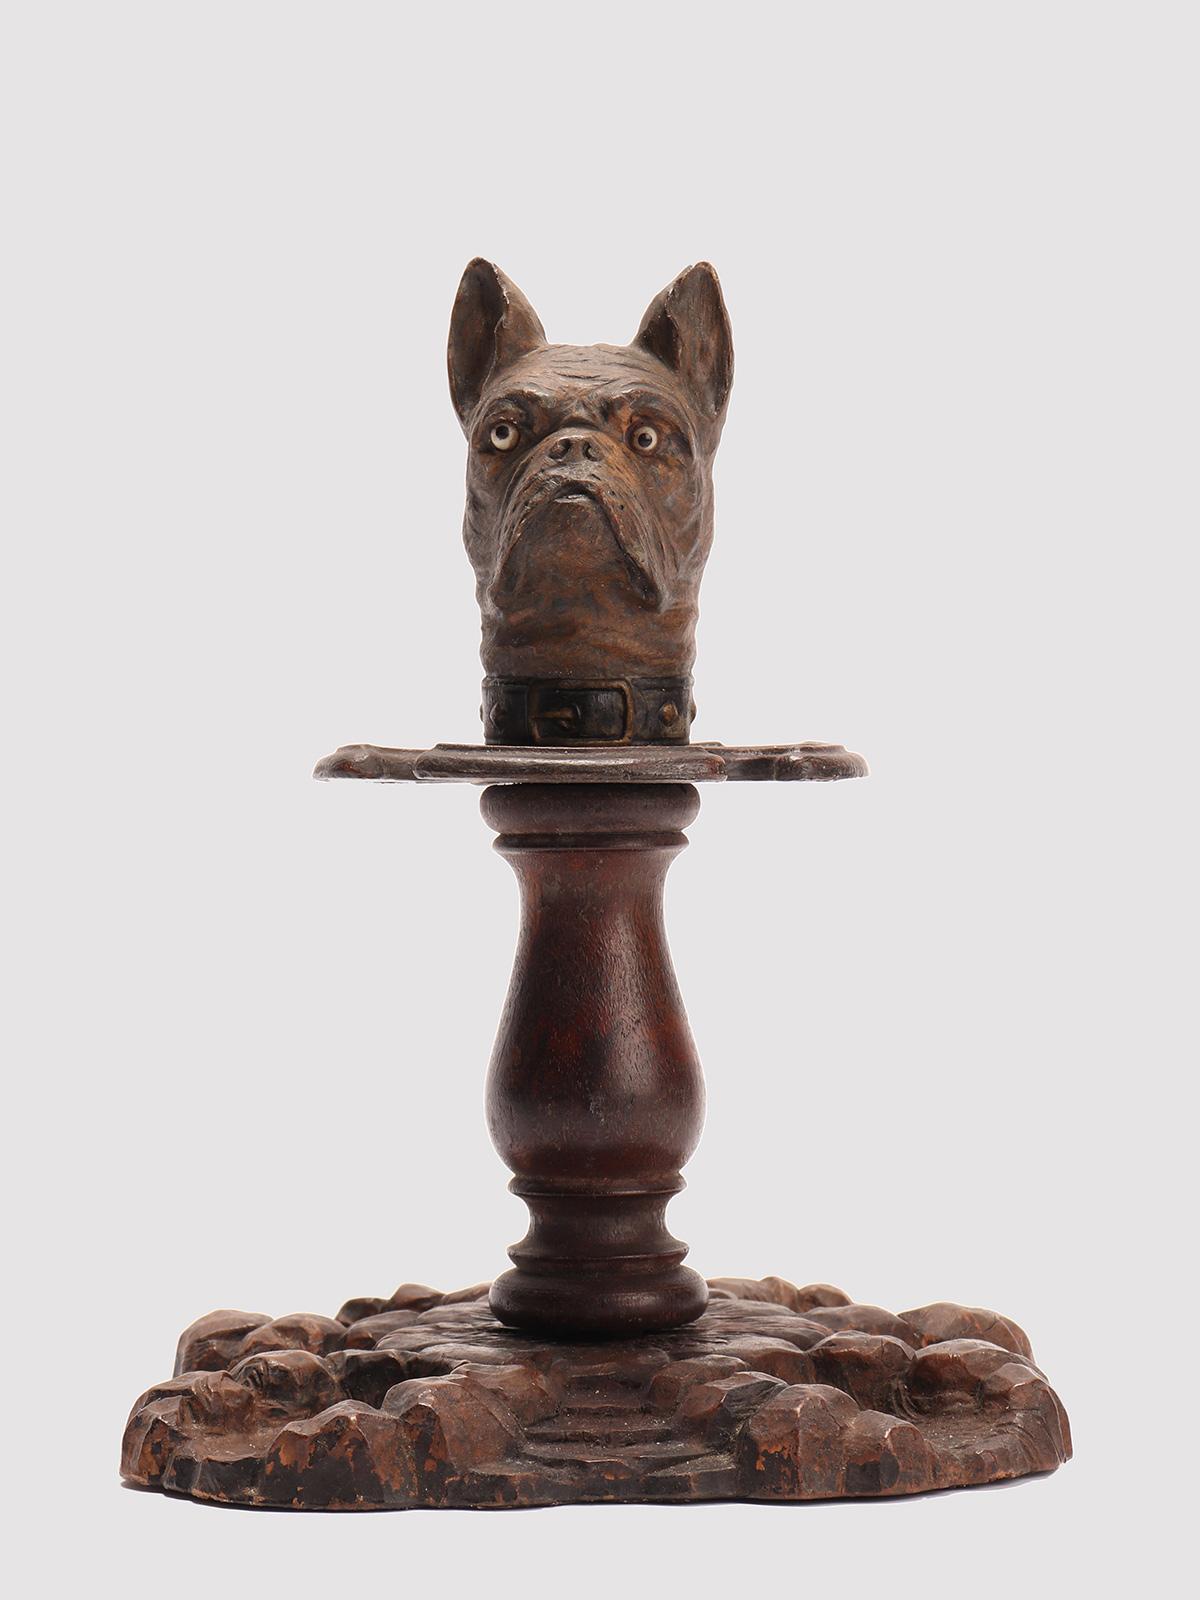 Pipe holder, made of carved wood depicting a french bulldog. Glass paste eyes. Black Forest, Germany, circa 1900.